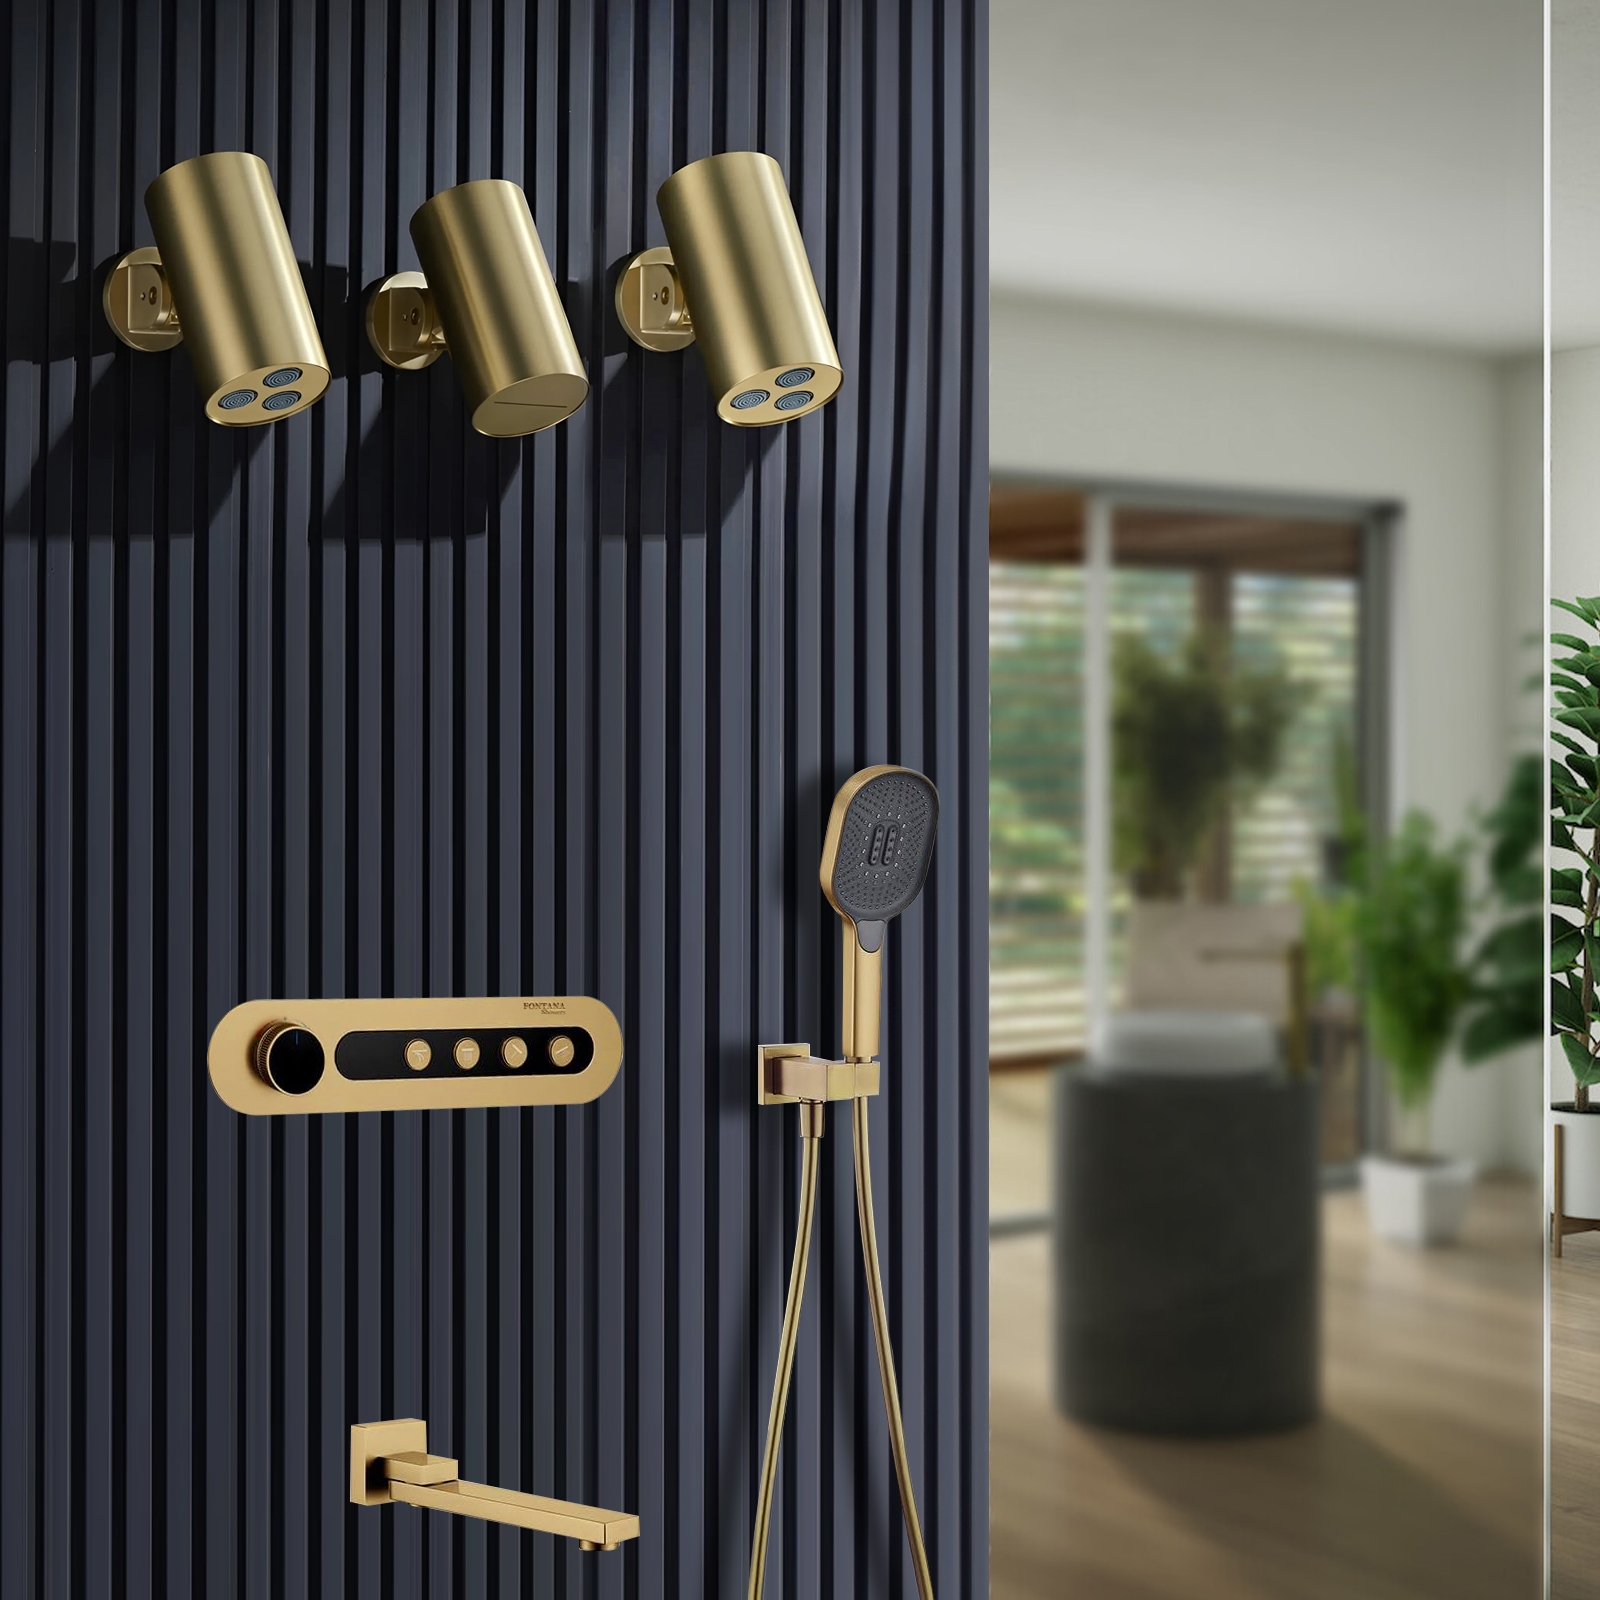 Fontana Cotteridge In Brushed Gold Finish Stainless Steel Thermostatic With Digital Display Copper Bathroom Mixer In Shower Set